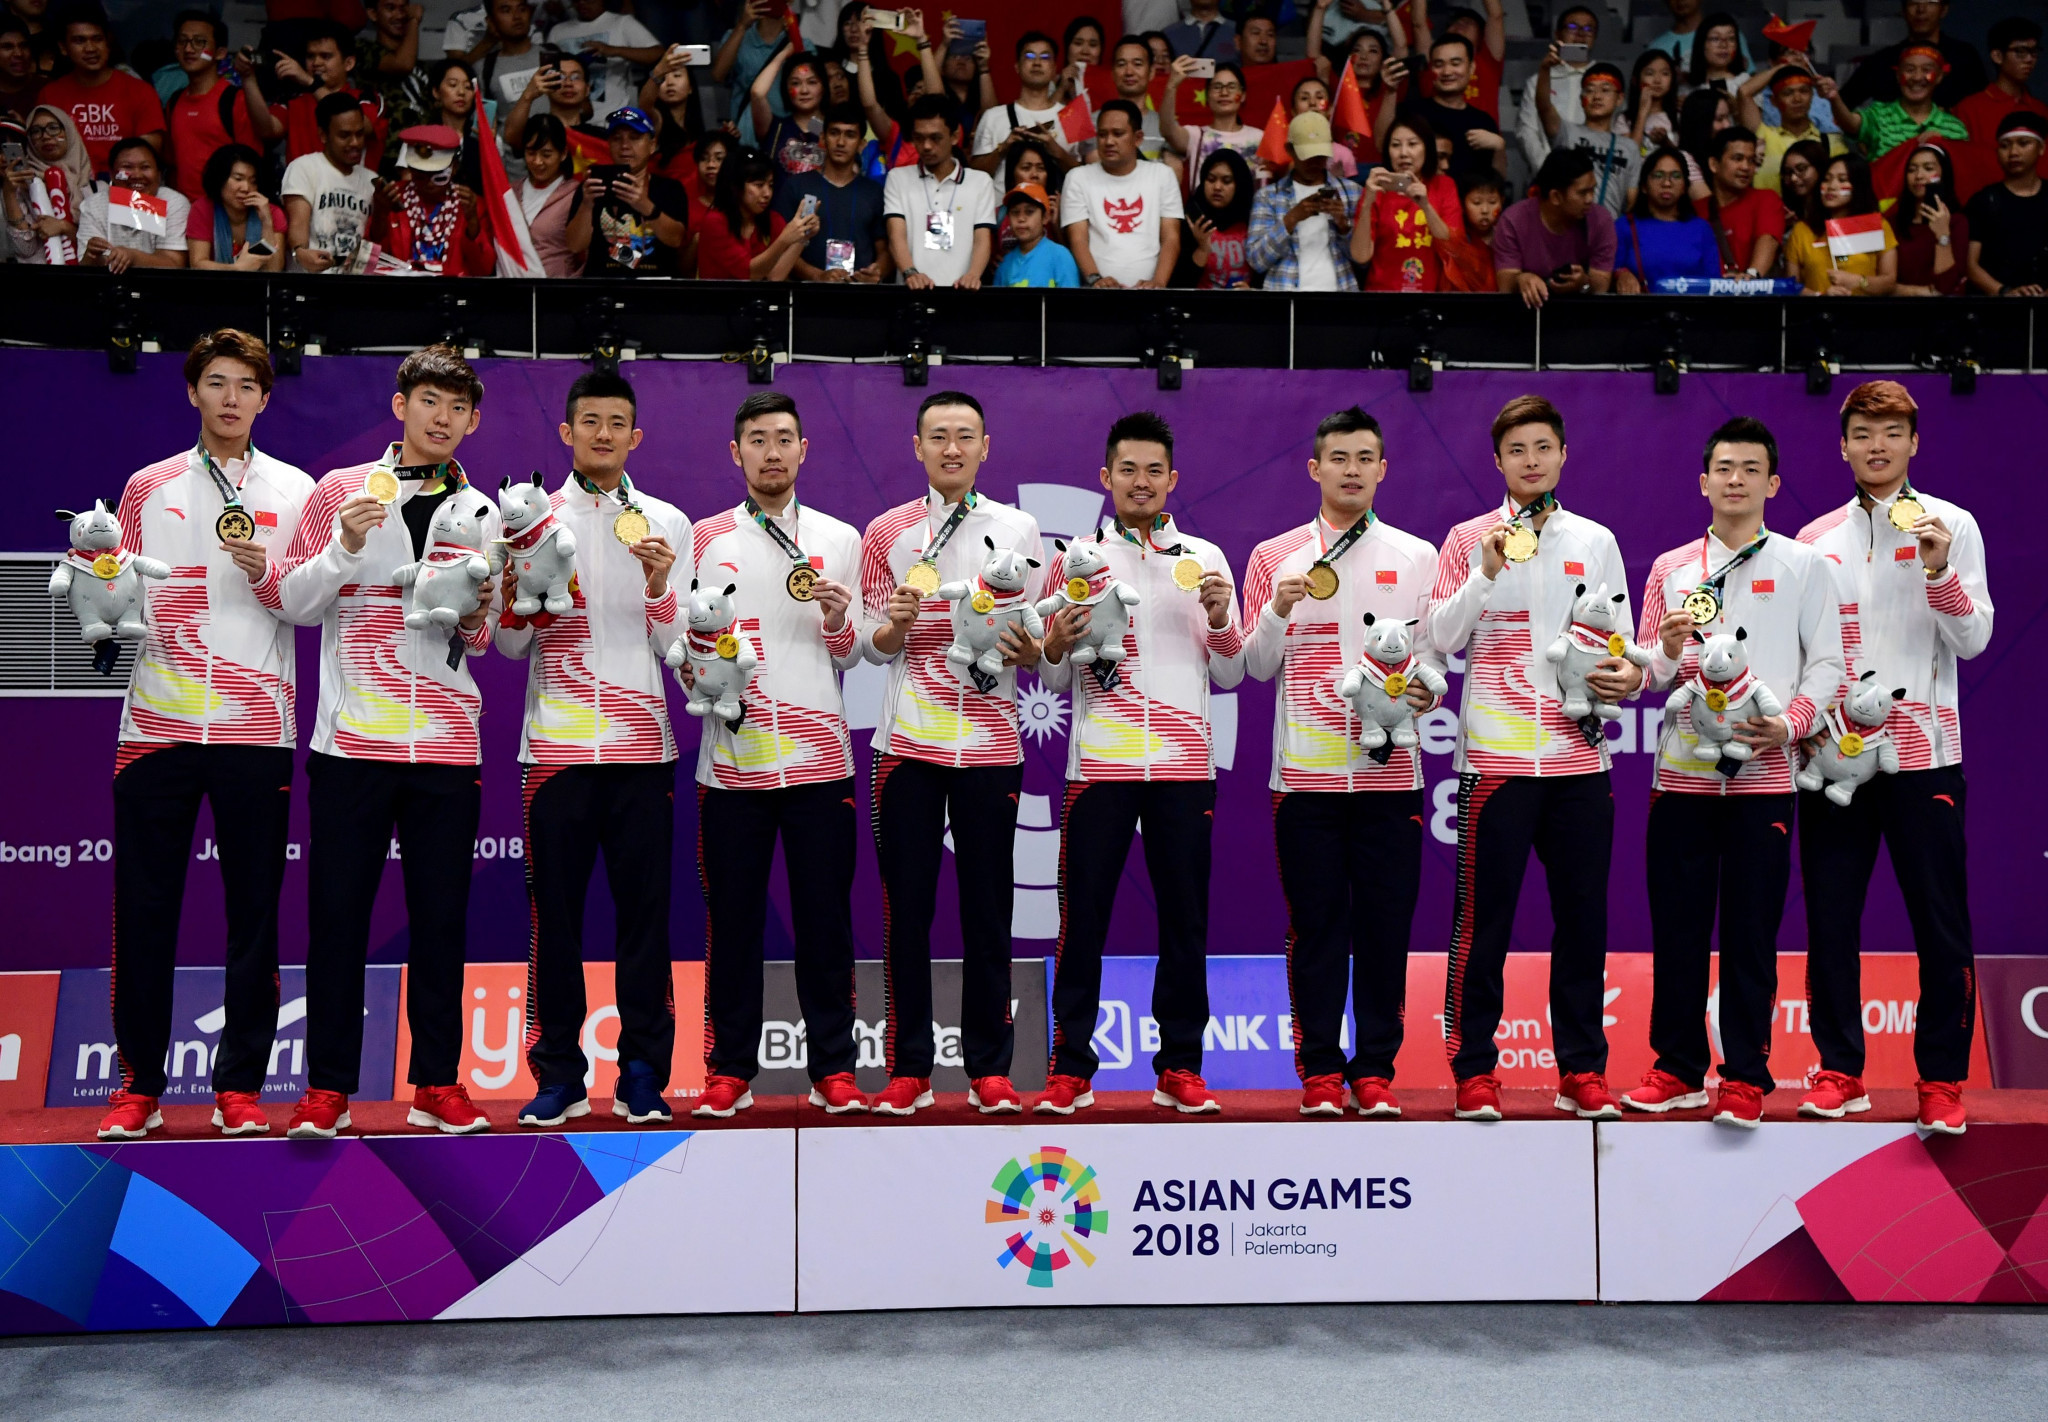 China re-gained their Asian Games men's team badminton title after beating hosts Indonesia 3-1 this evening in a five-hour epic encounter ©Getty Images